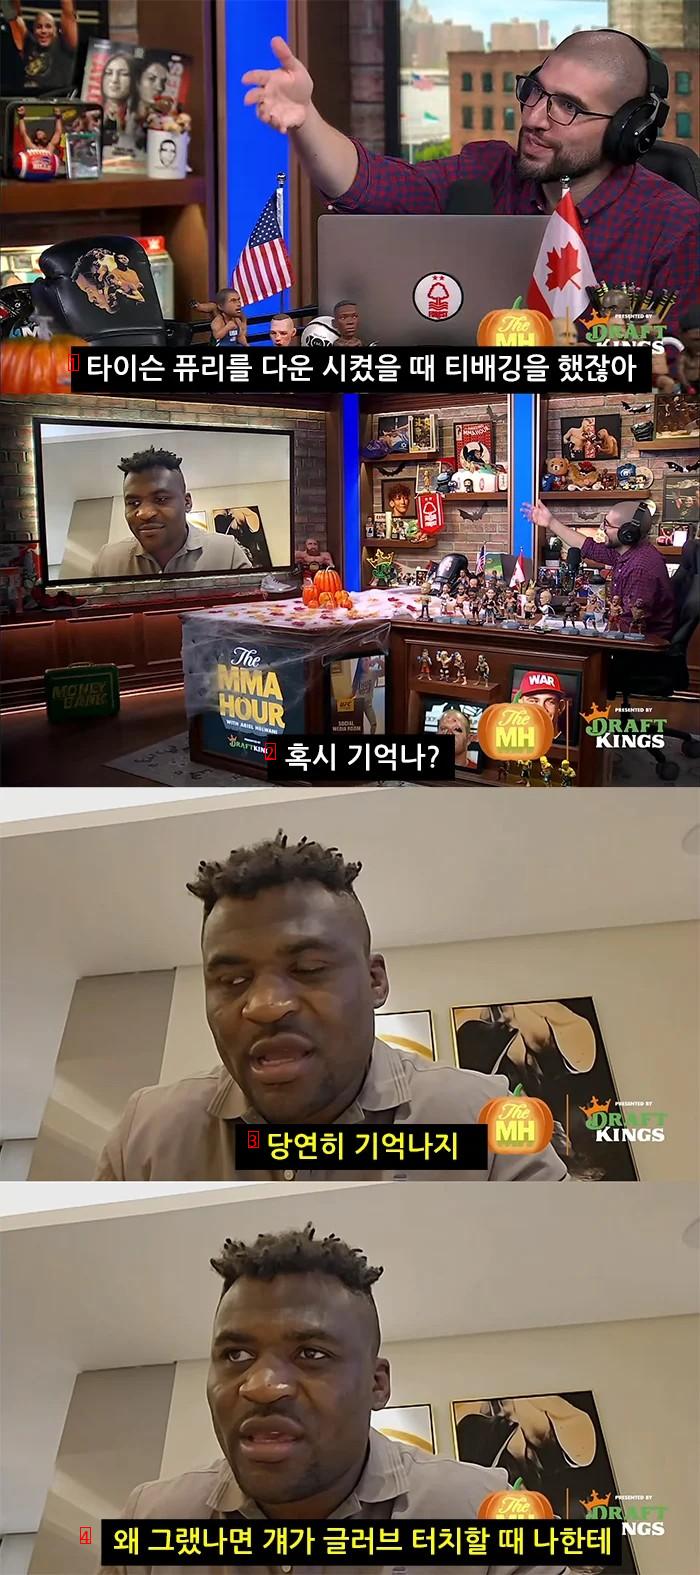 Why Ngannou provoked the boxing champion